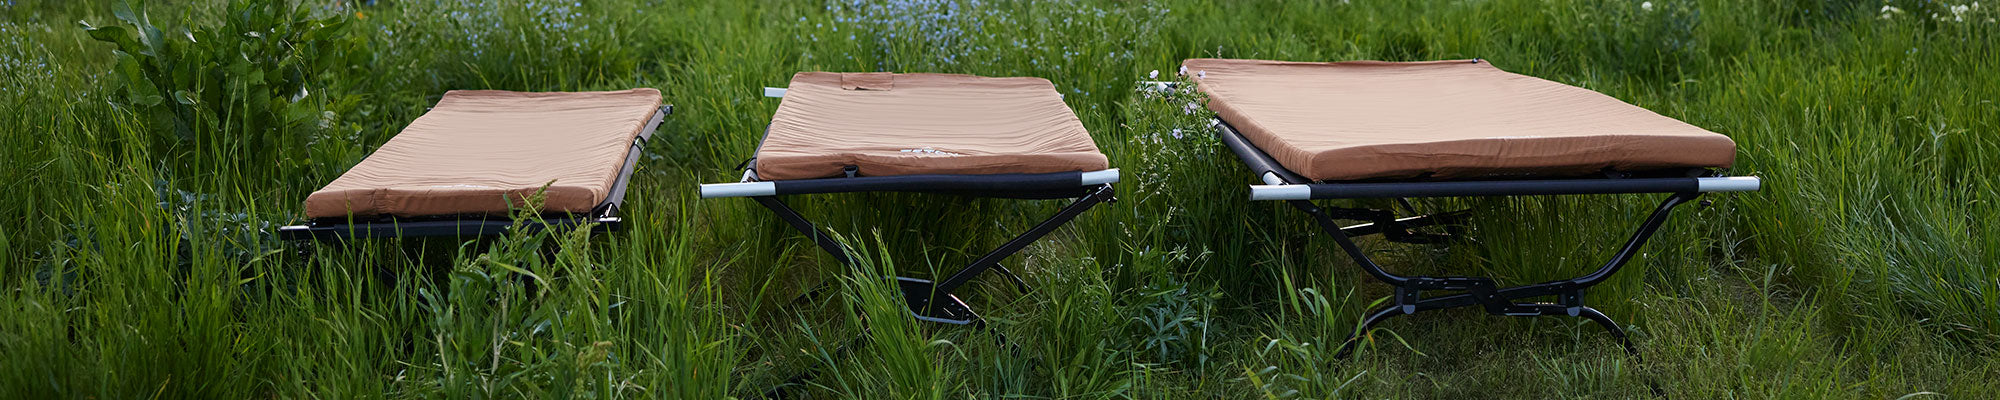 TETON Sports camp cots with canvas camp pads are set up showcasing three different sizes.